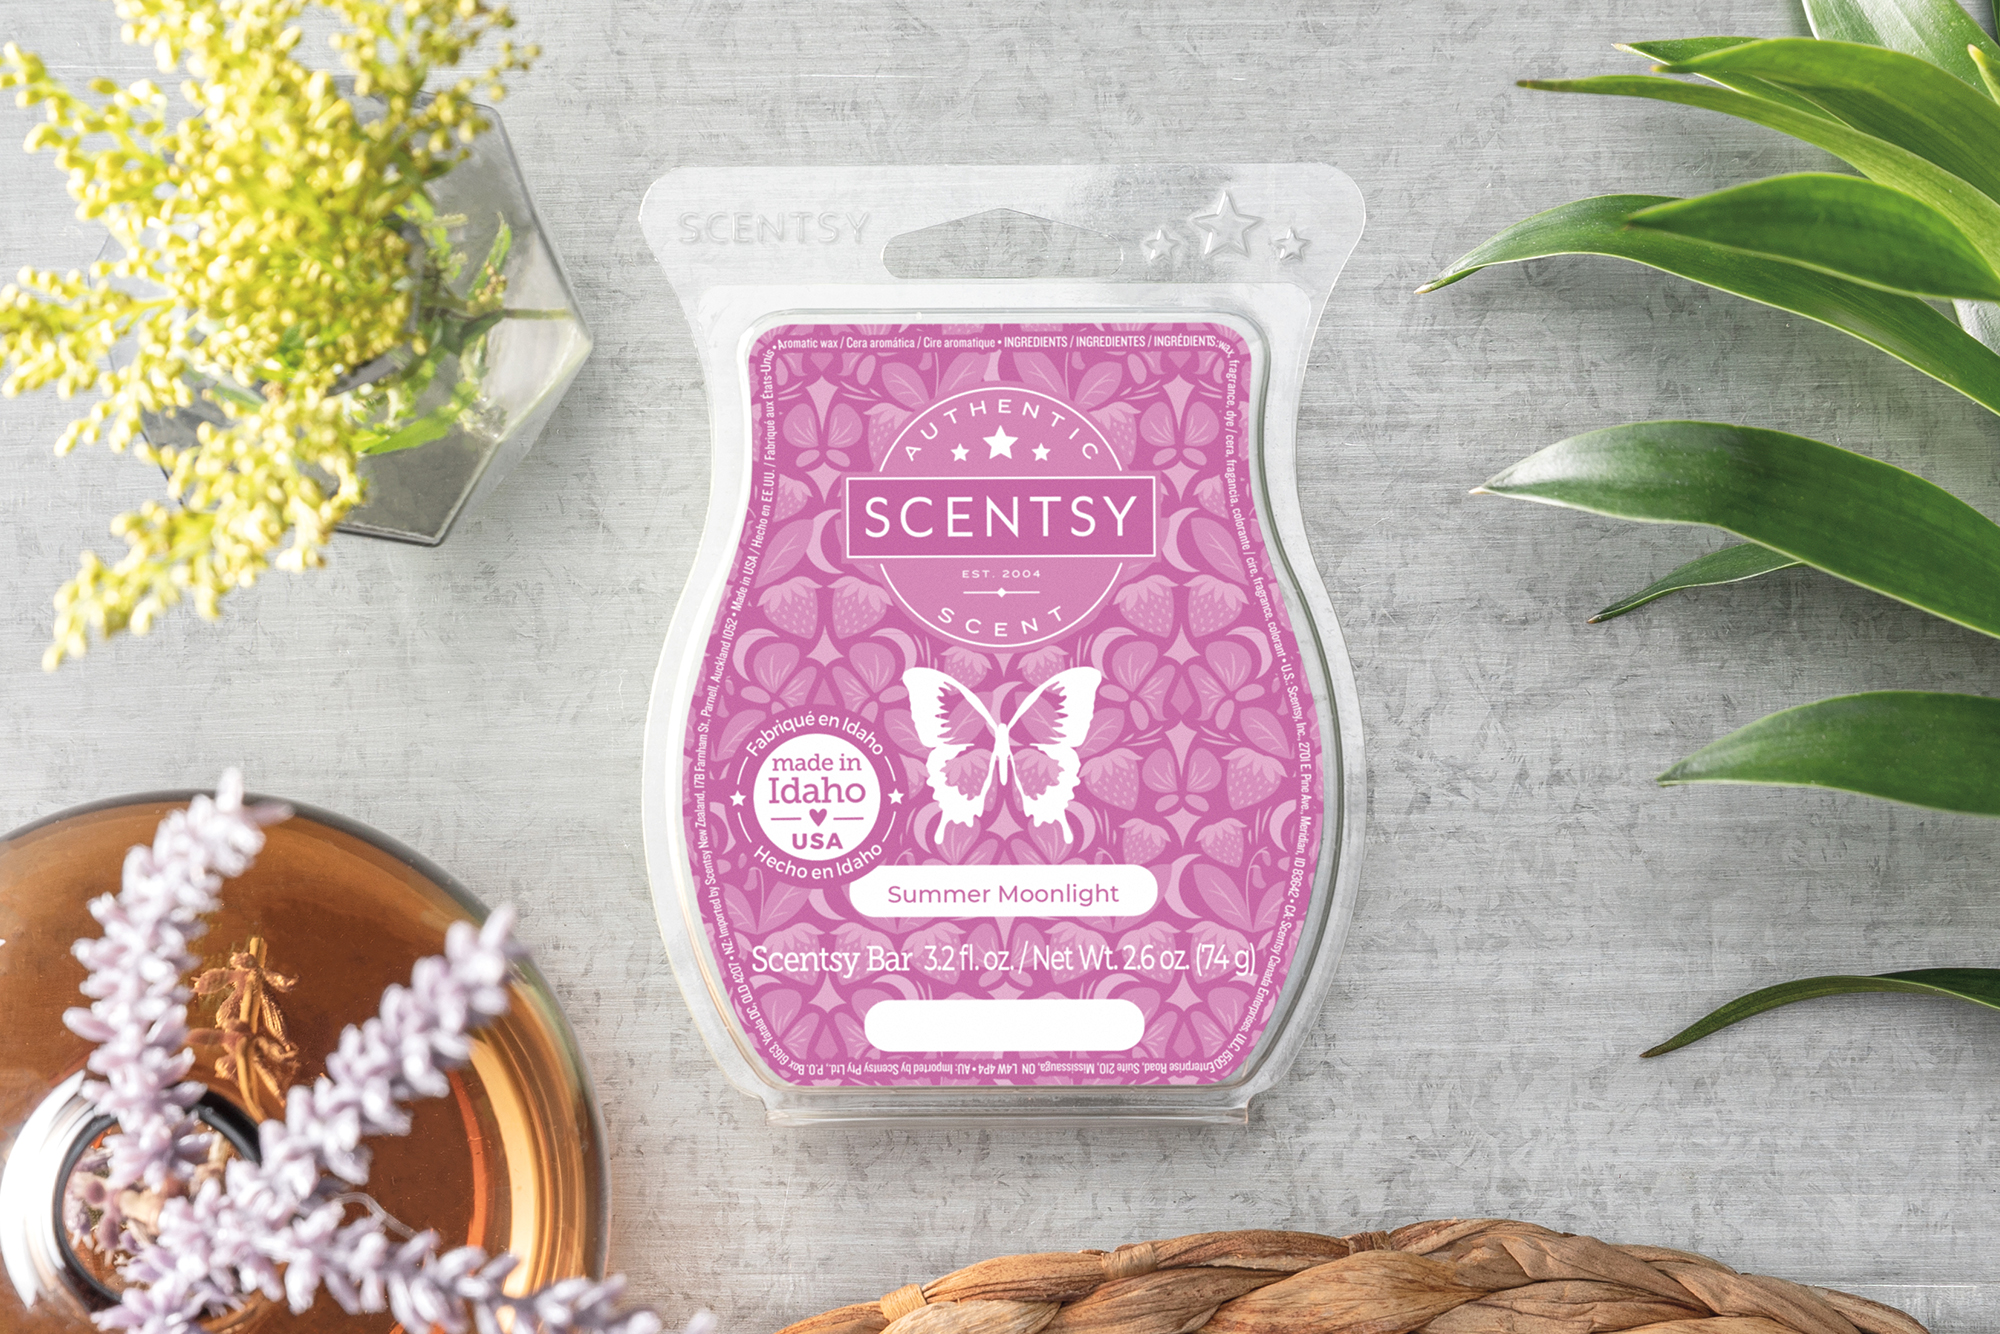 New spring Scentsy scents